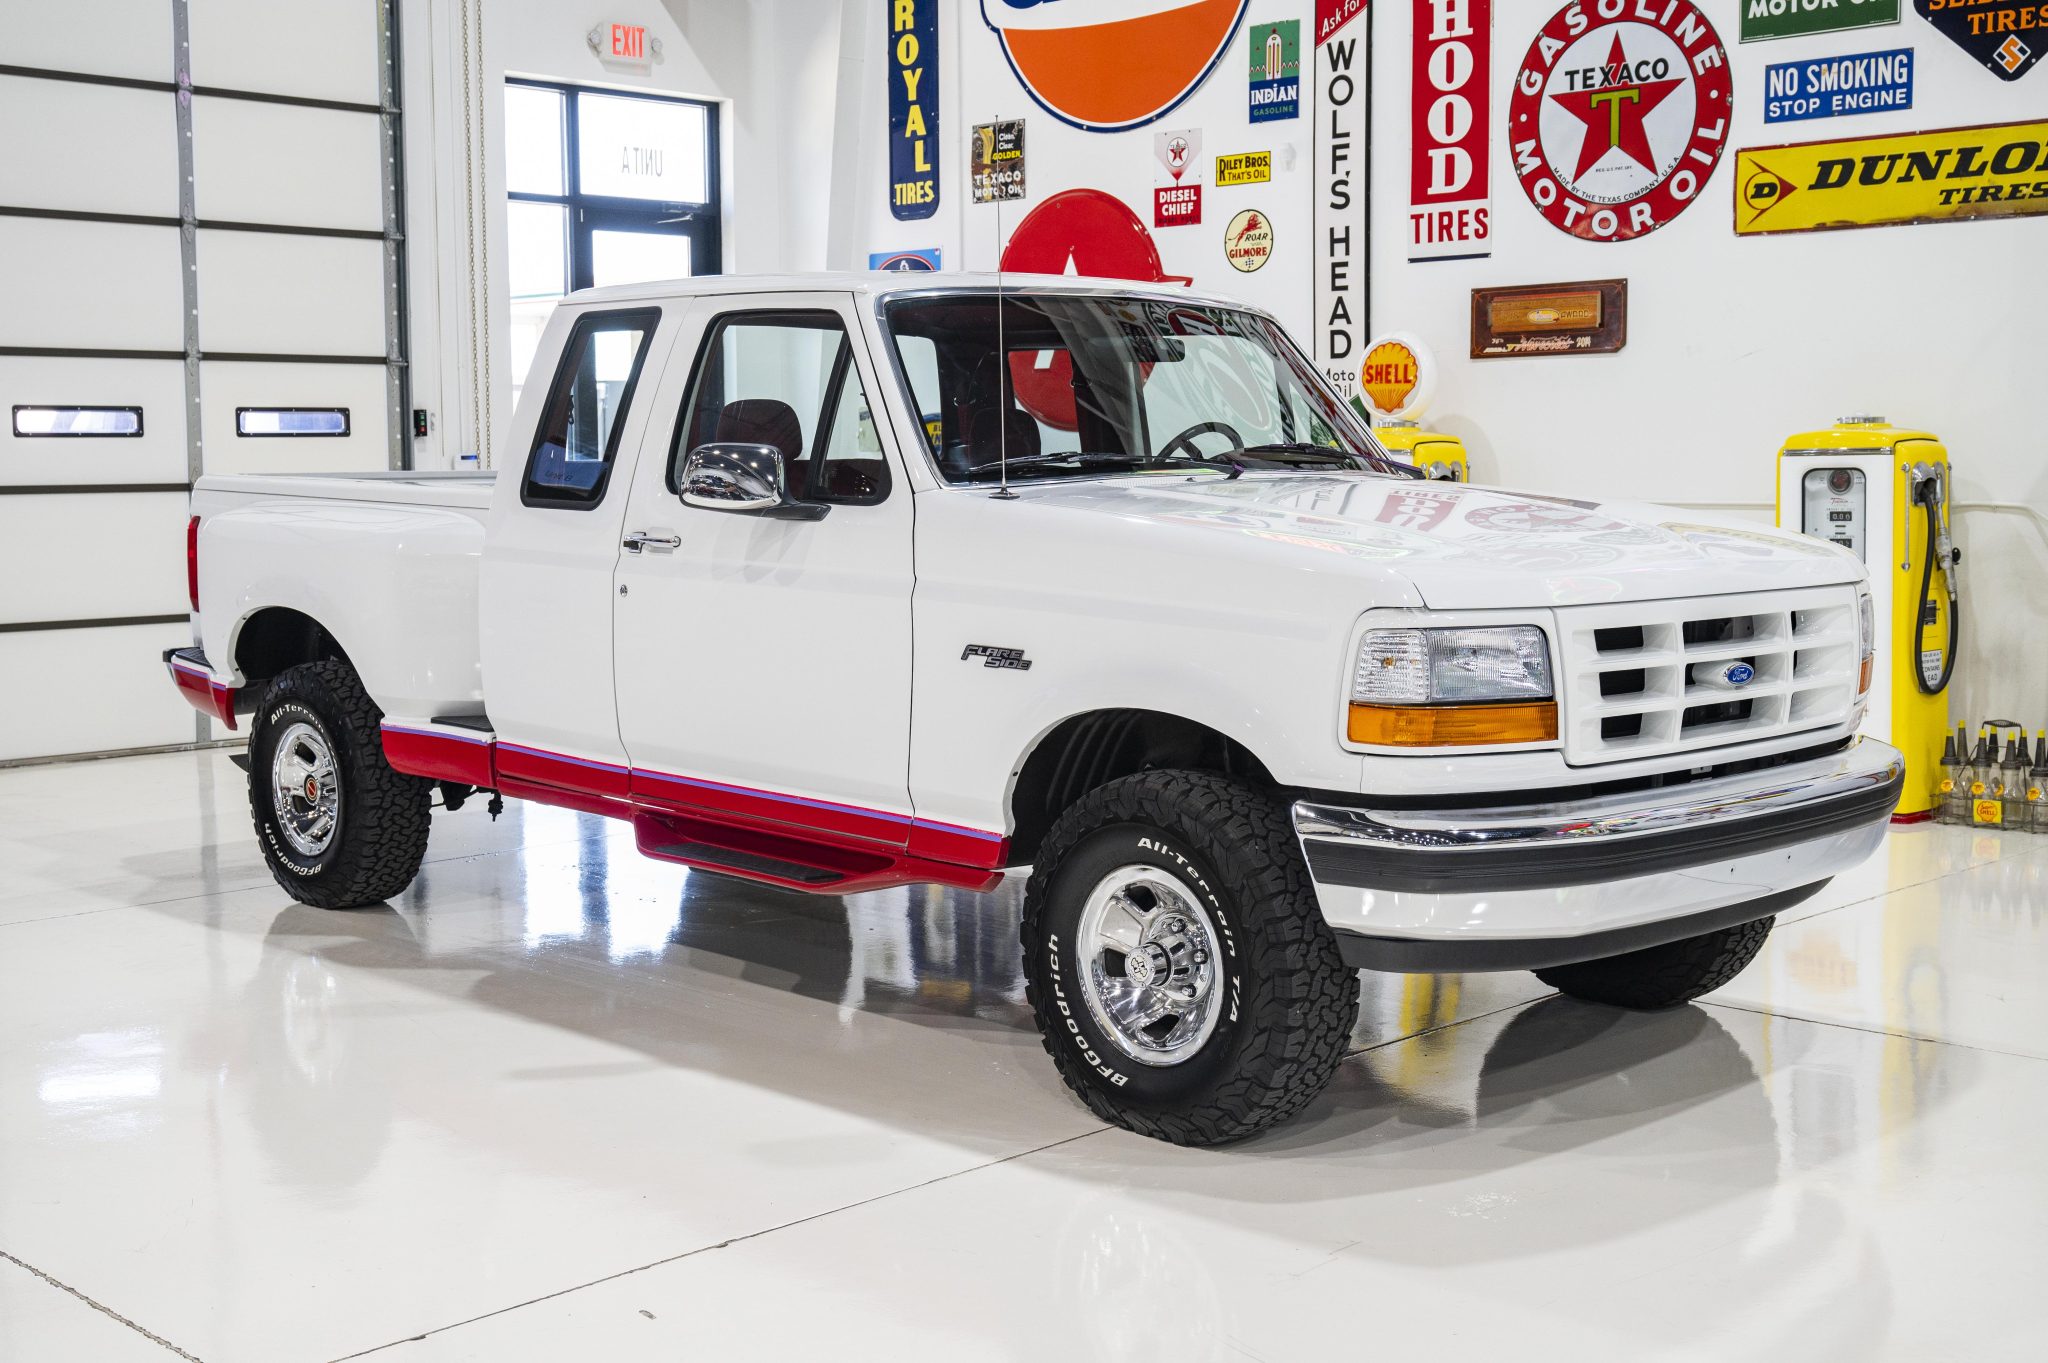 Used 290-Mile 1992 Ford F-150 XLT Lariat SuperCab Flareside 4×4 Review